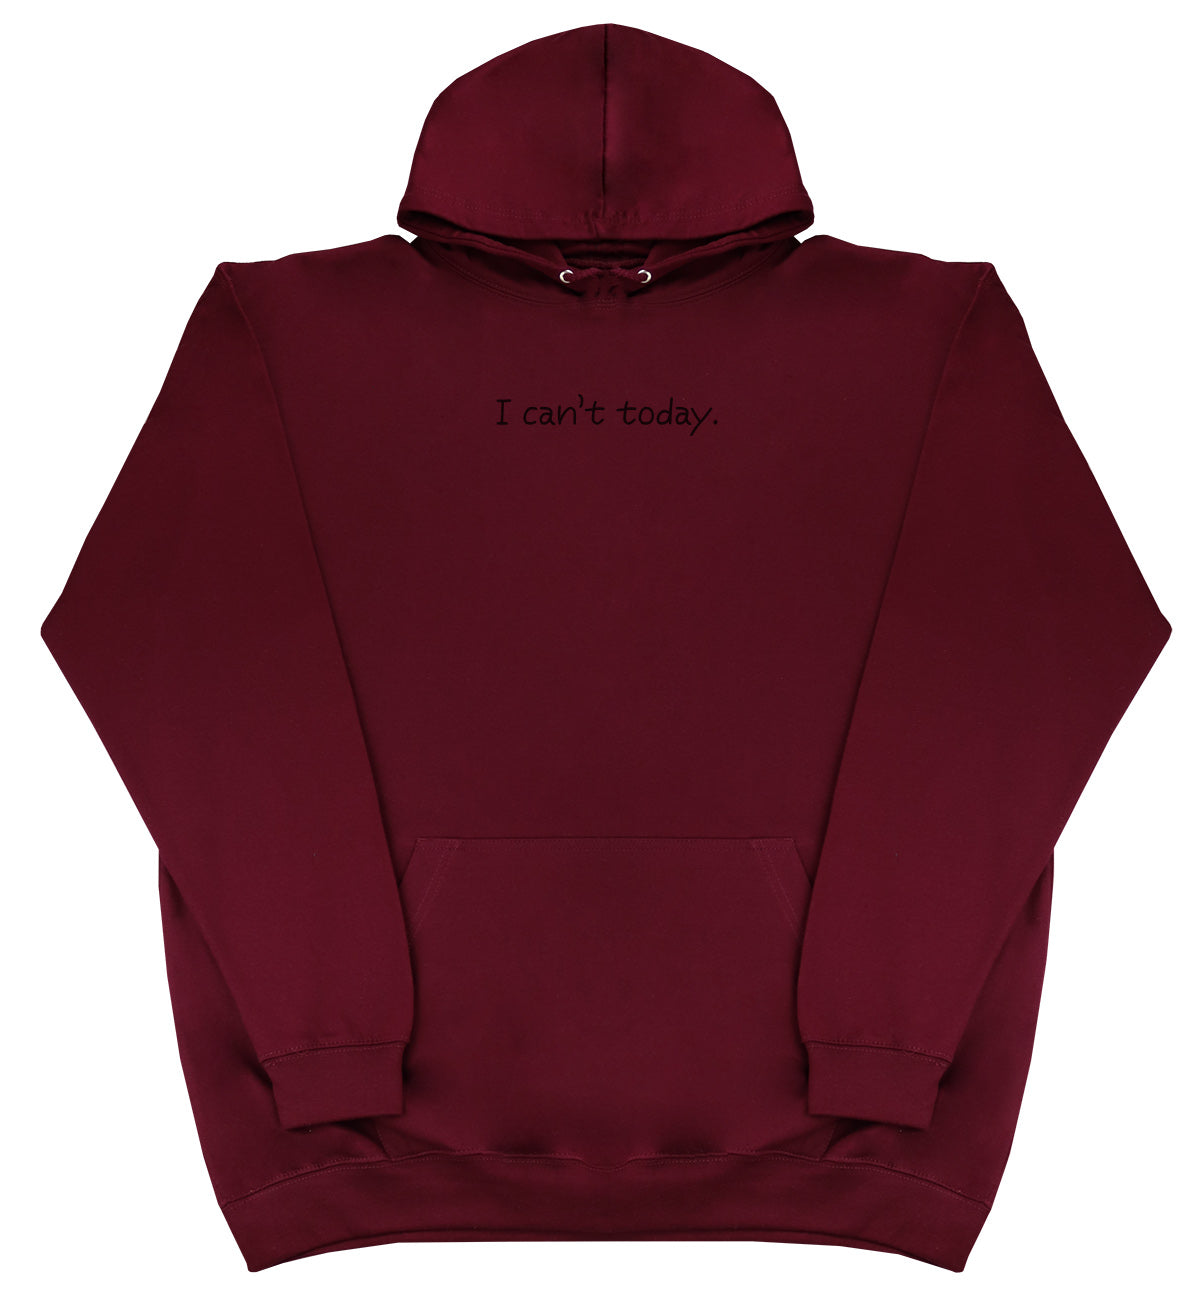 I Can't Today - Huge Oversized Comfy Original Hoody